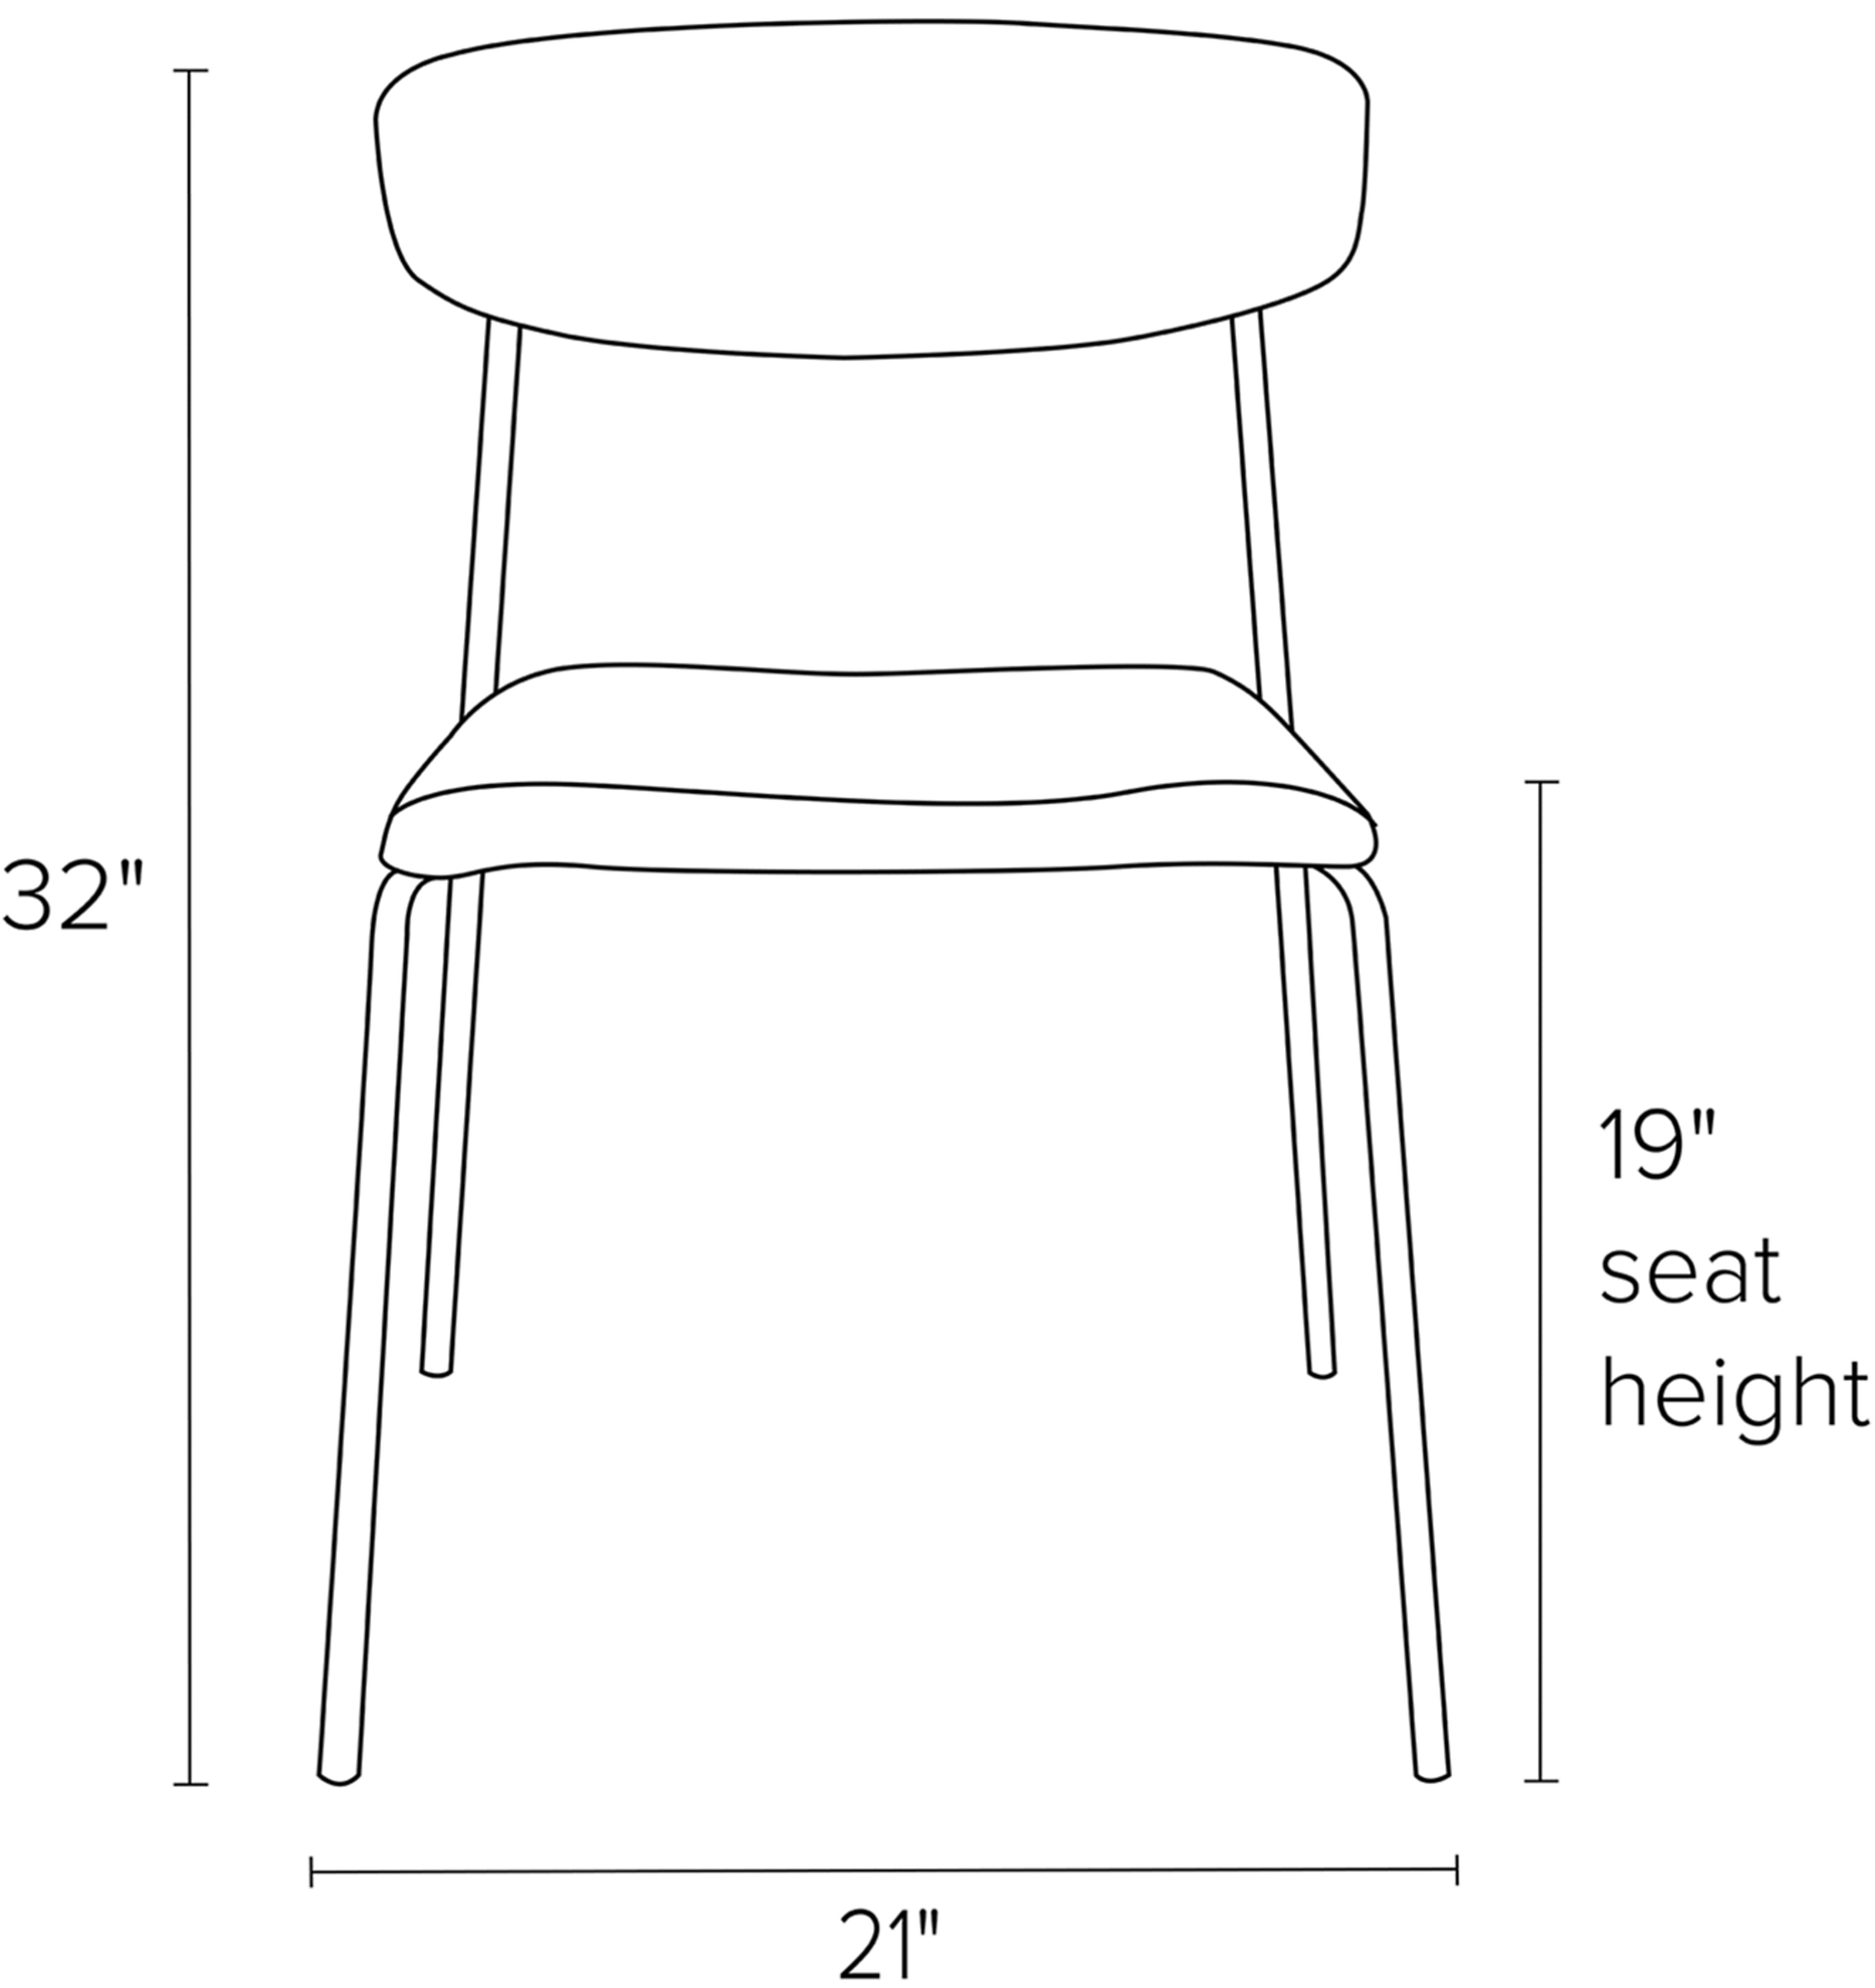 Front view dimension illustration of Wolfgang side chair.